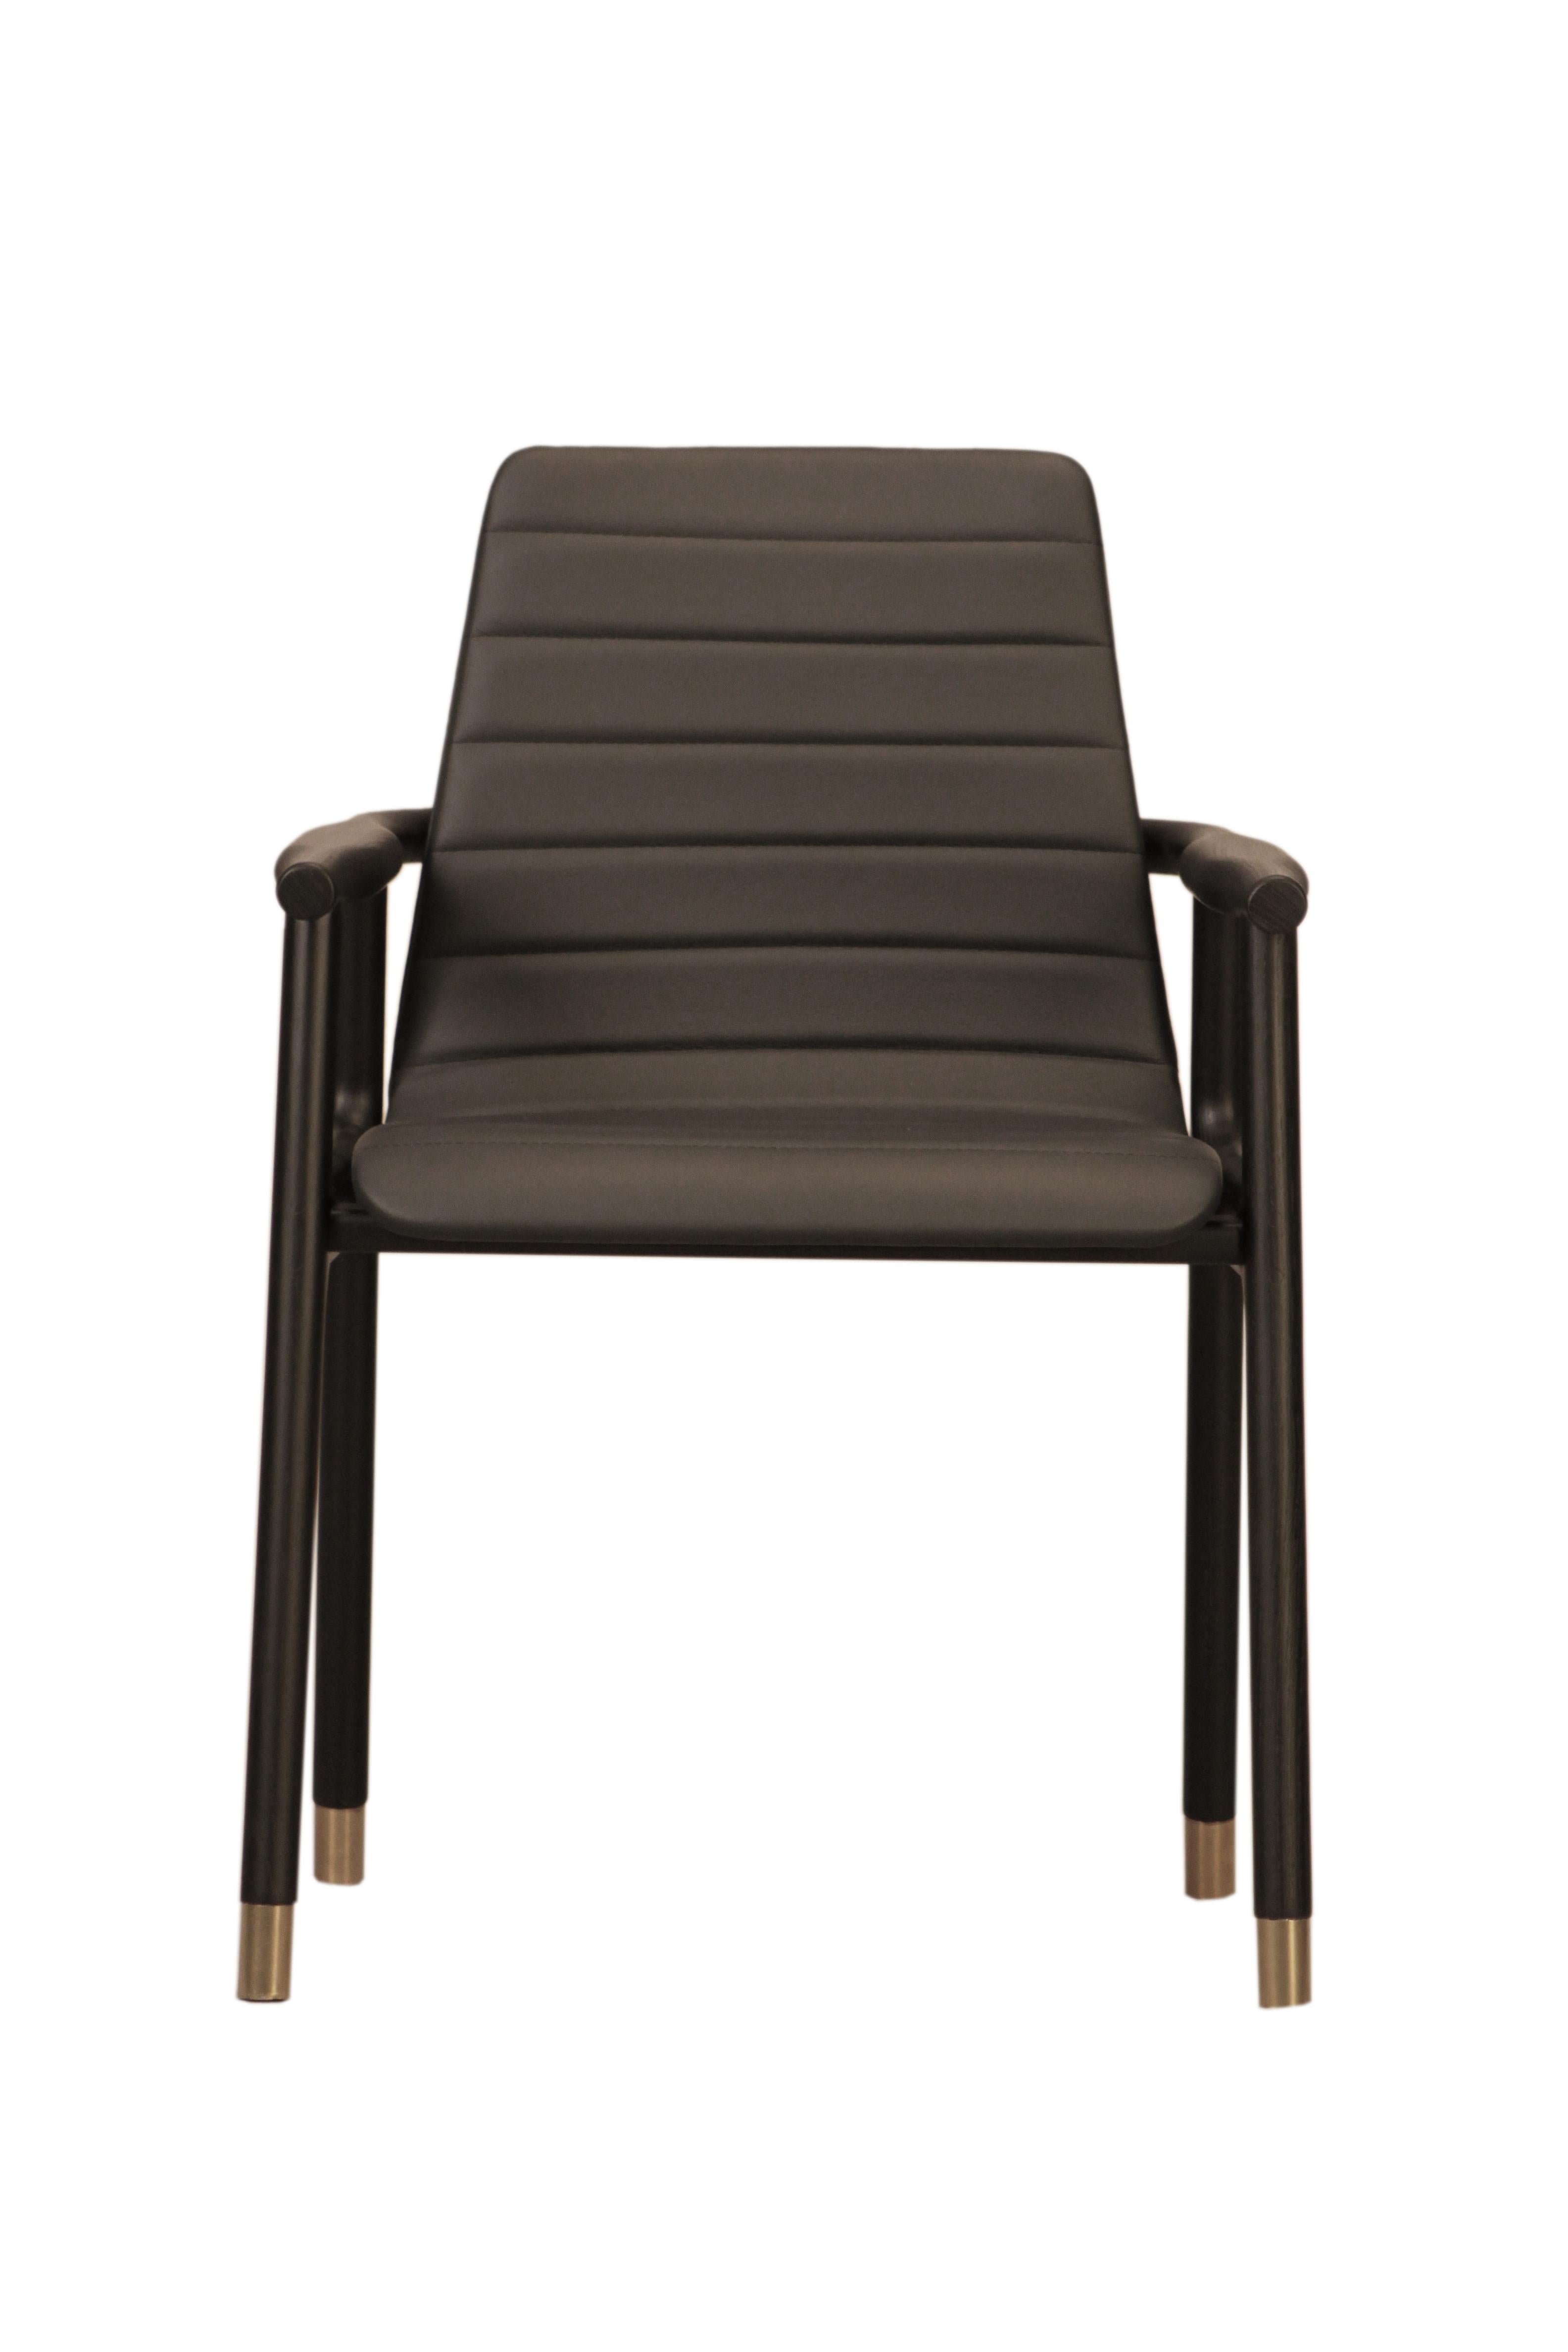 Contemporary style Joyce dining armchair made of ashwood with leather tufted seat and brass tips.
Design Libero Rutilo